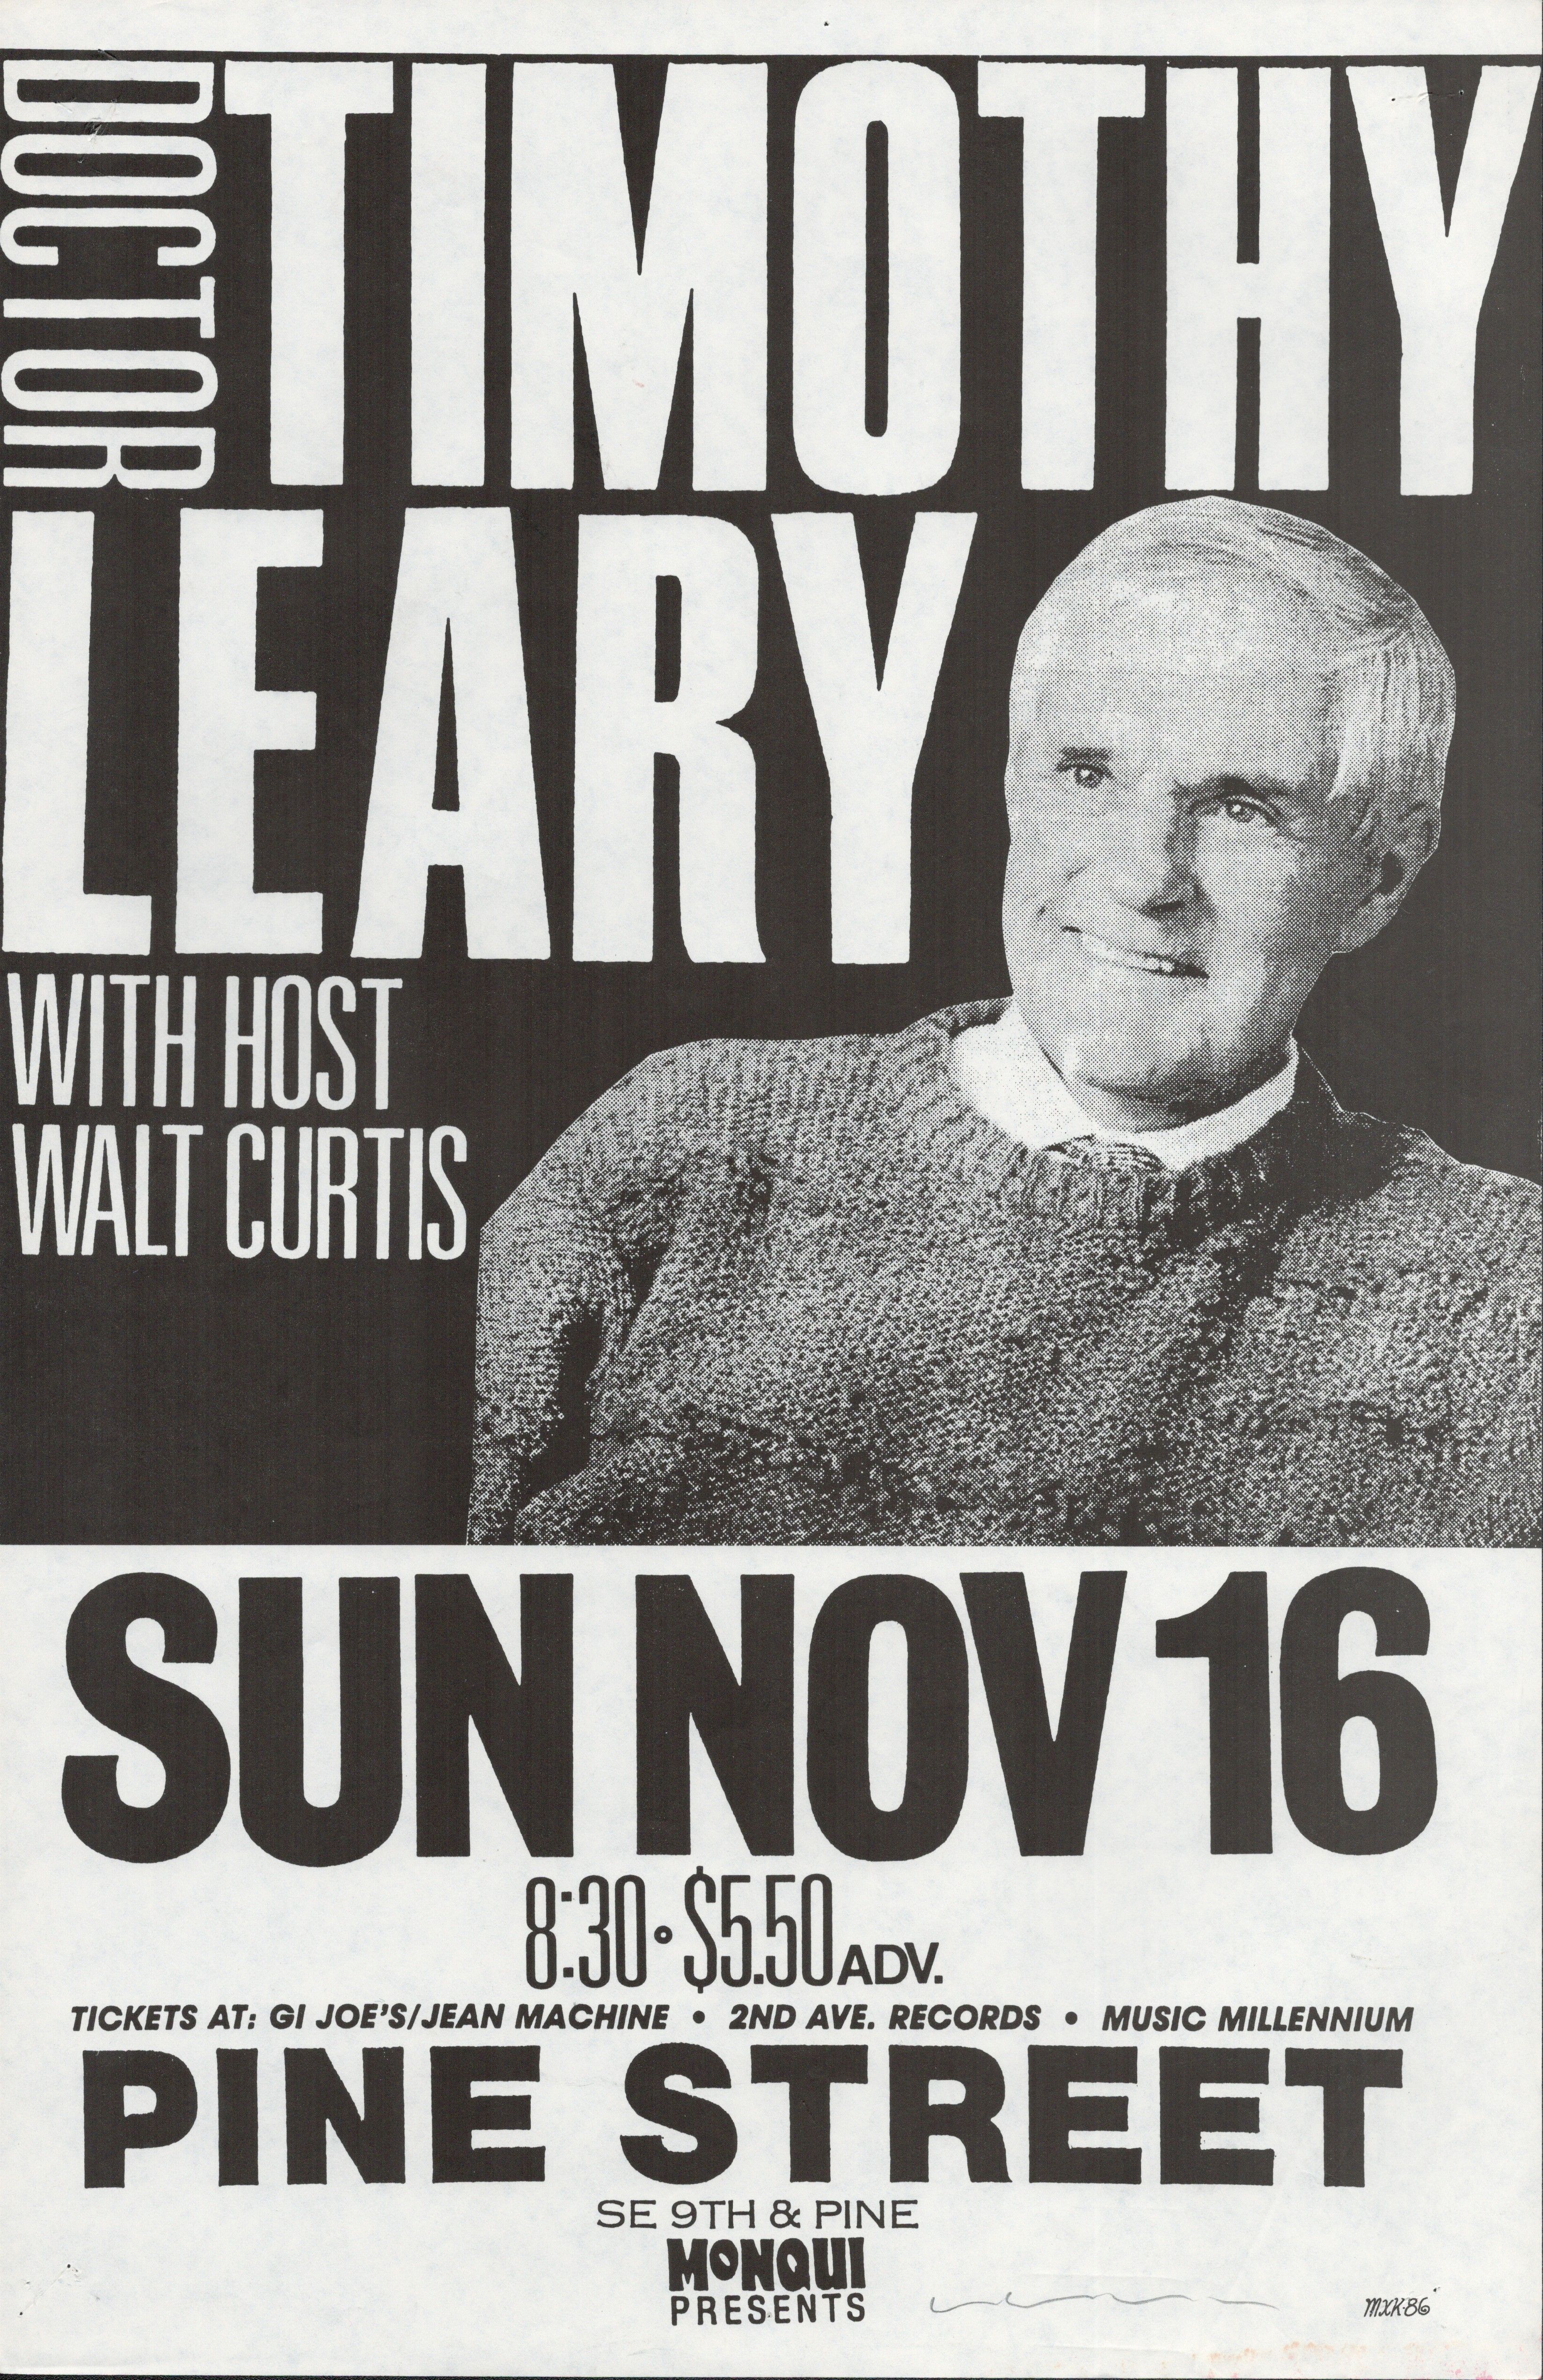 MXP-229.4 Timothy Leary 1986 Pine Street Theatre  Nov 16 Concert Poster